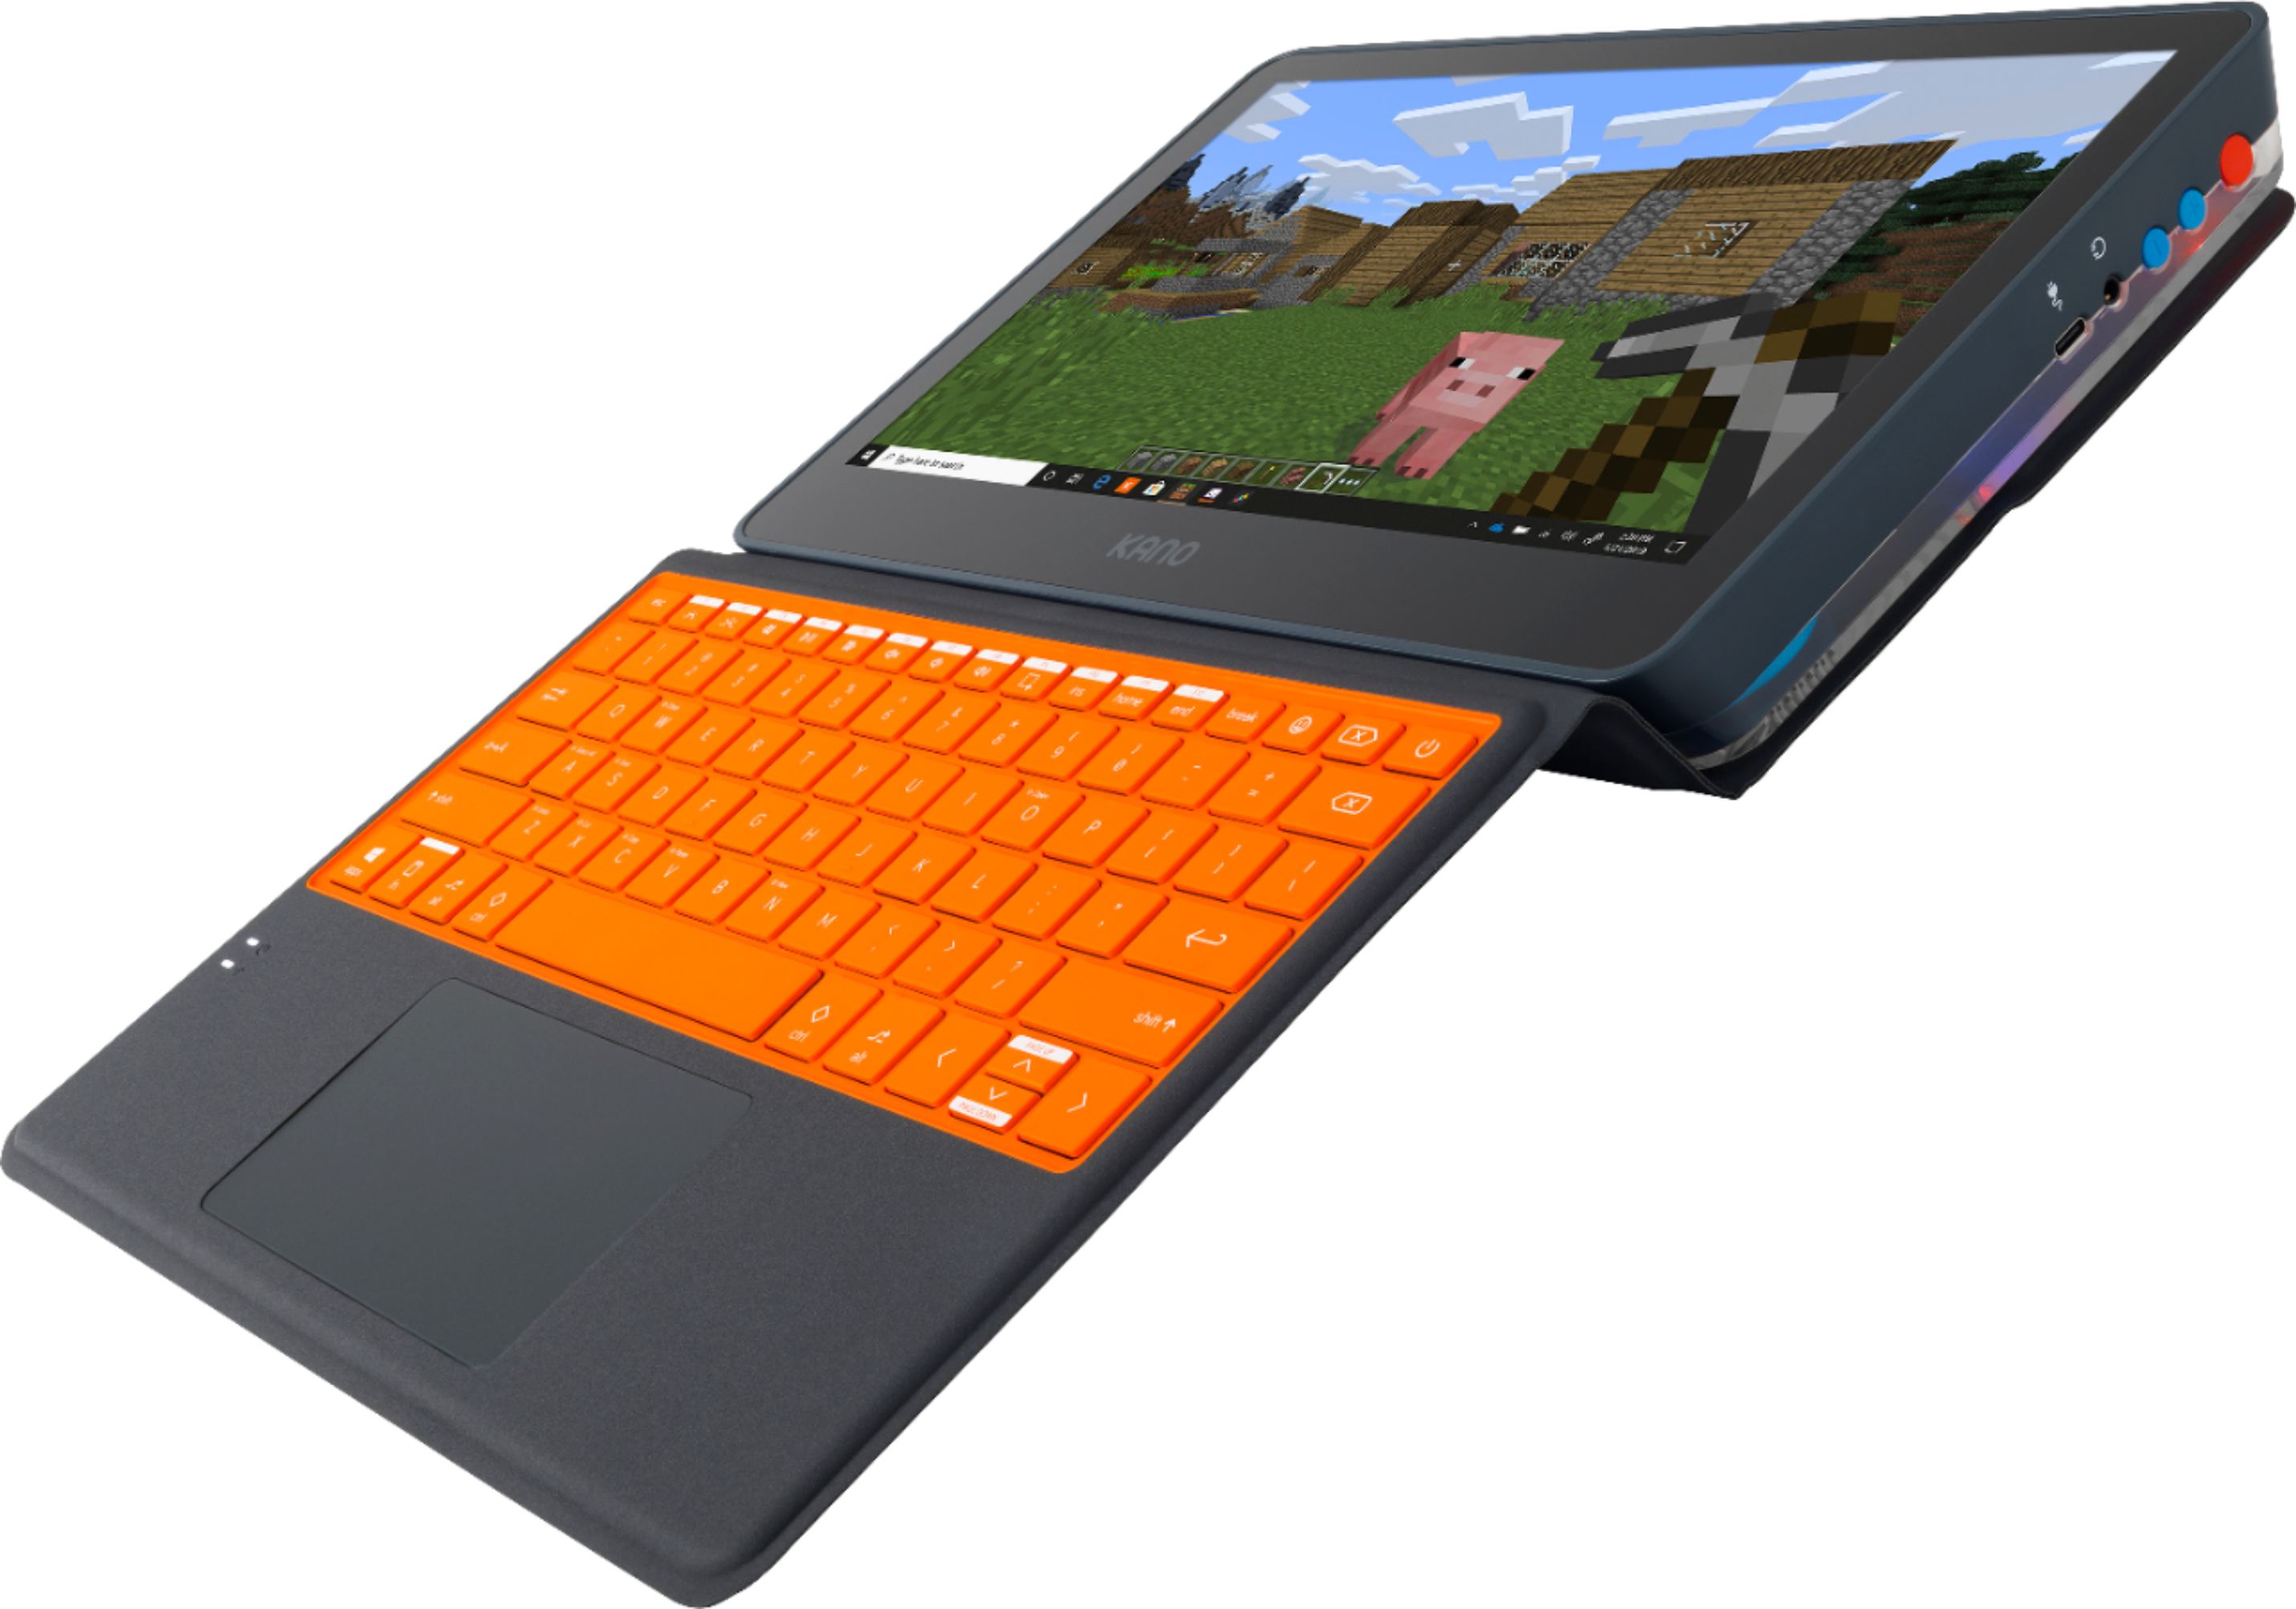 Kano Pc 11 6 Kids Touch Screen Laptop Tablet 1 10 Ghz Processor Windows 10 4gb Memory 64gb Storage Black 1101 02 Best Buy - how to download roblox on kano computer